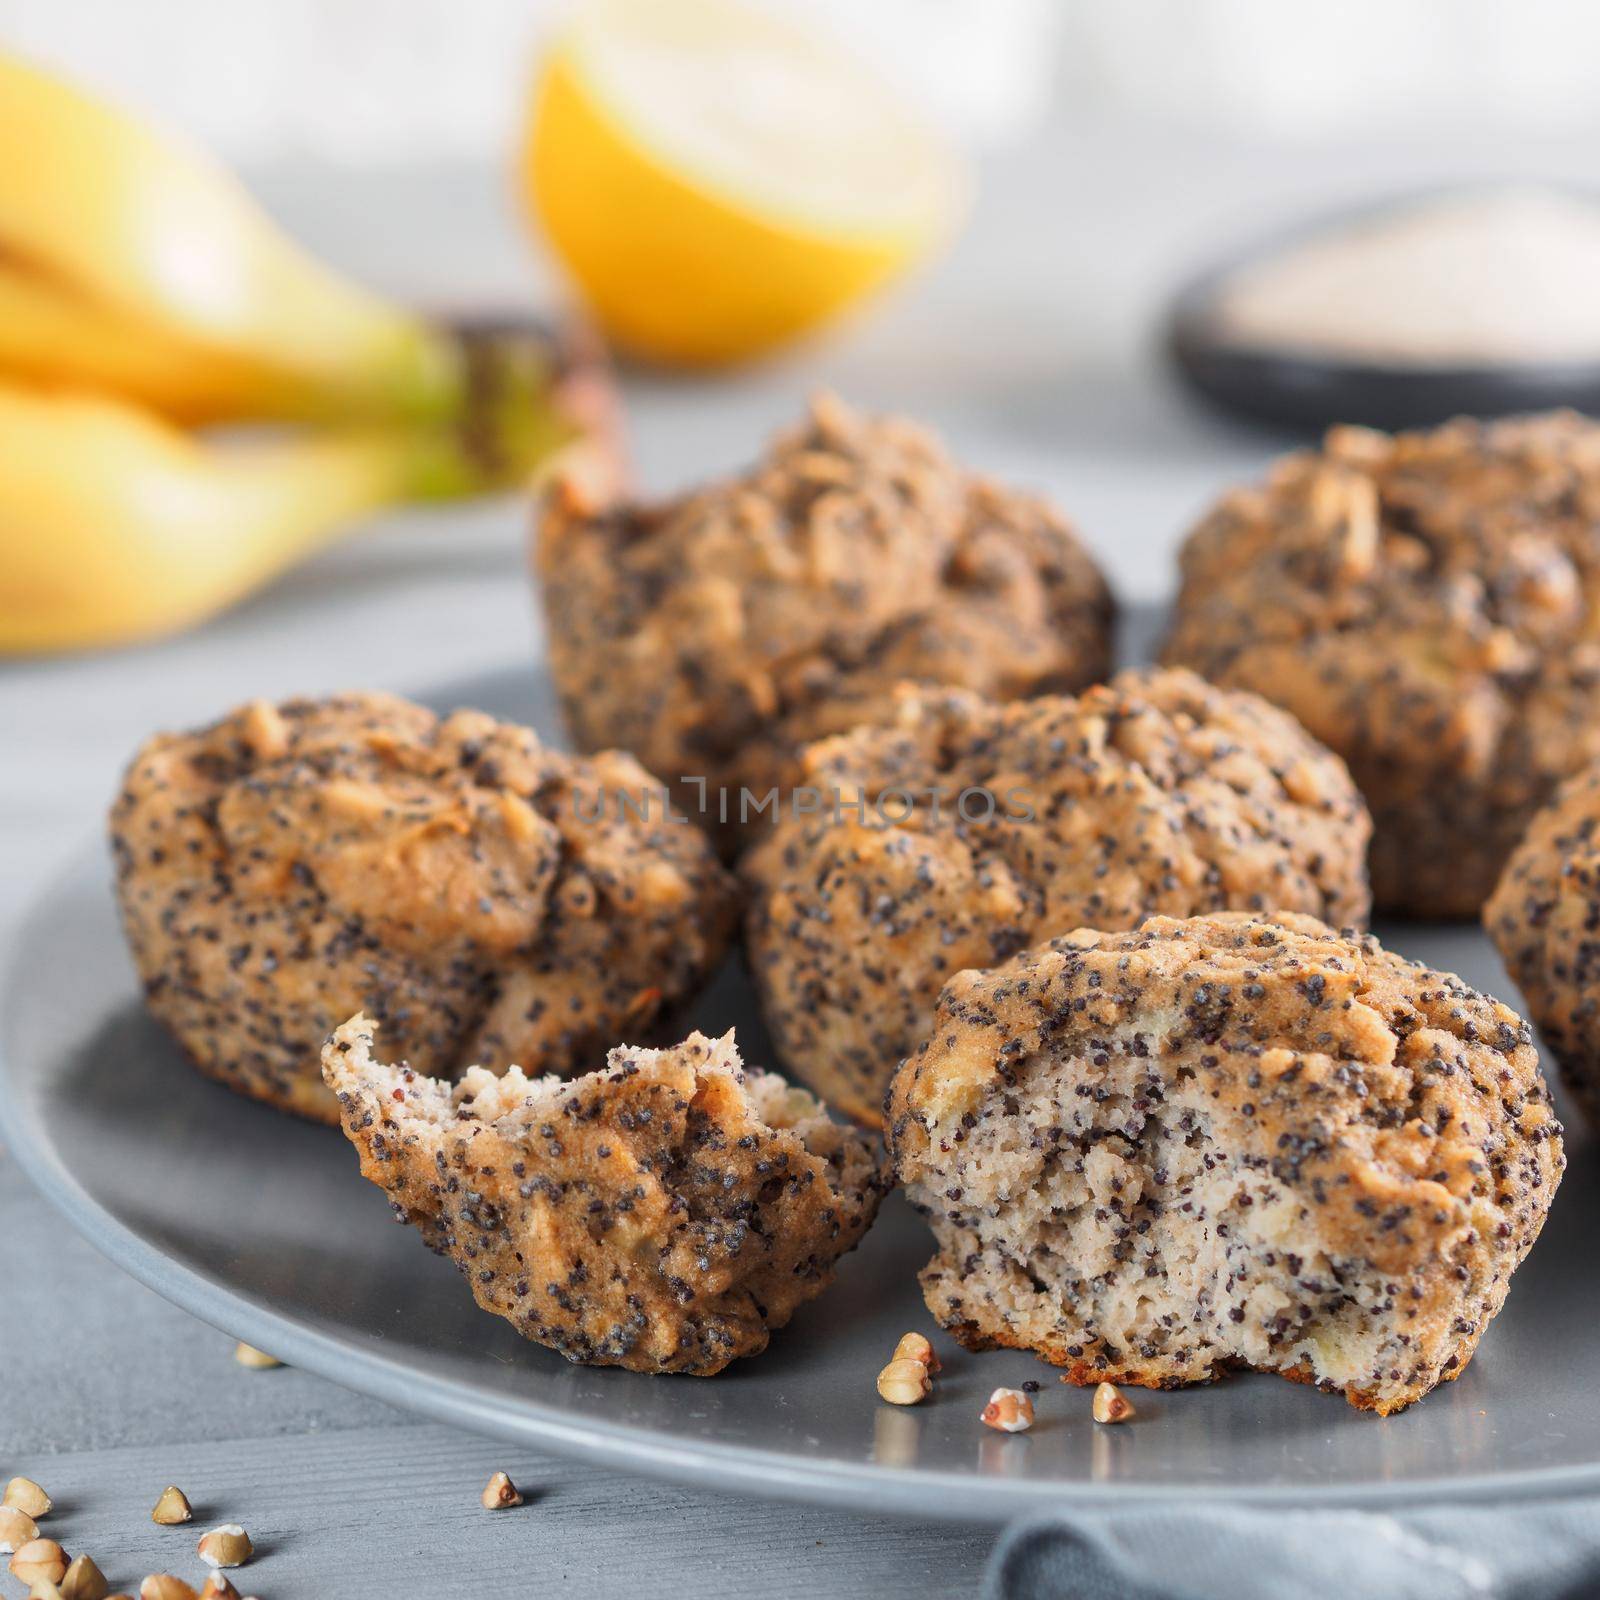 banana muffins with buckwheat flour and poppy seeds by fascinadora